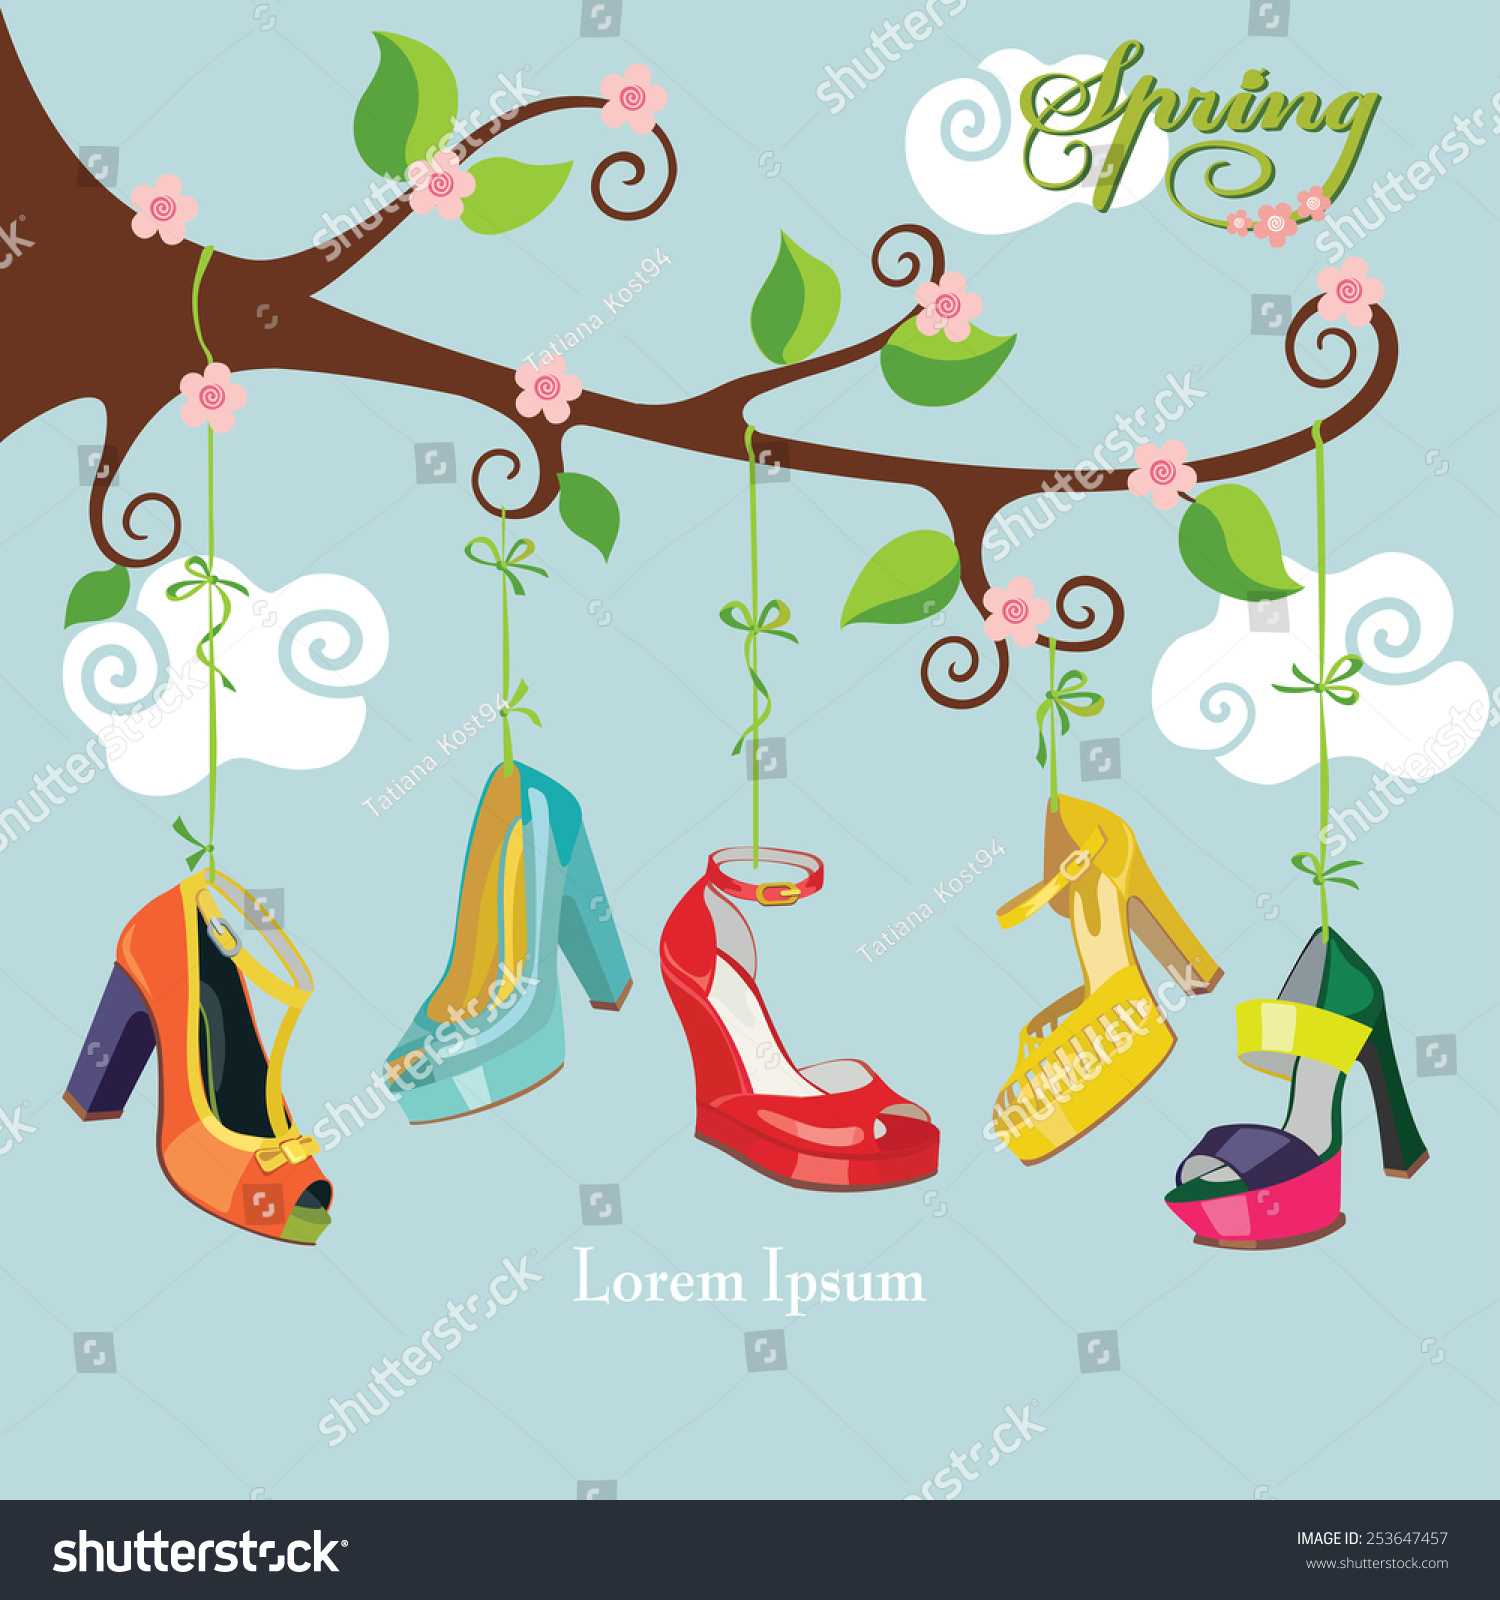 Vector Spring Cardflowering Branch Colored High Stock Vector With Regard To High Heel Shoe Template For Card